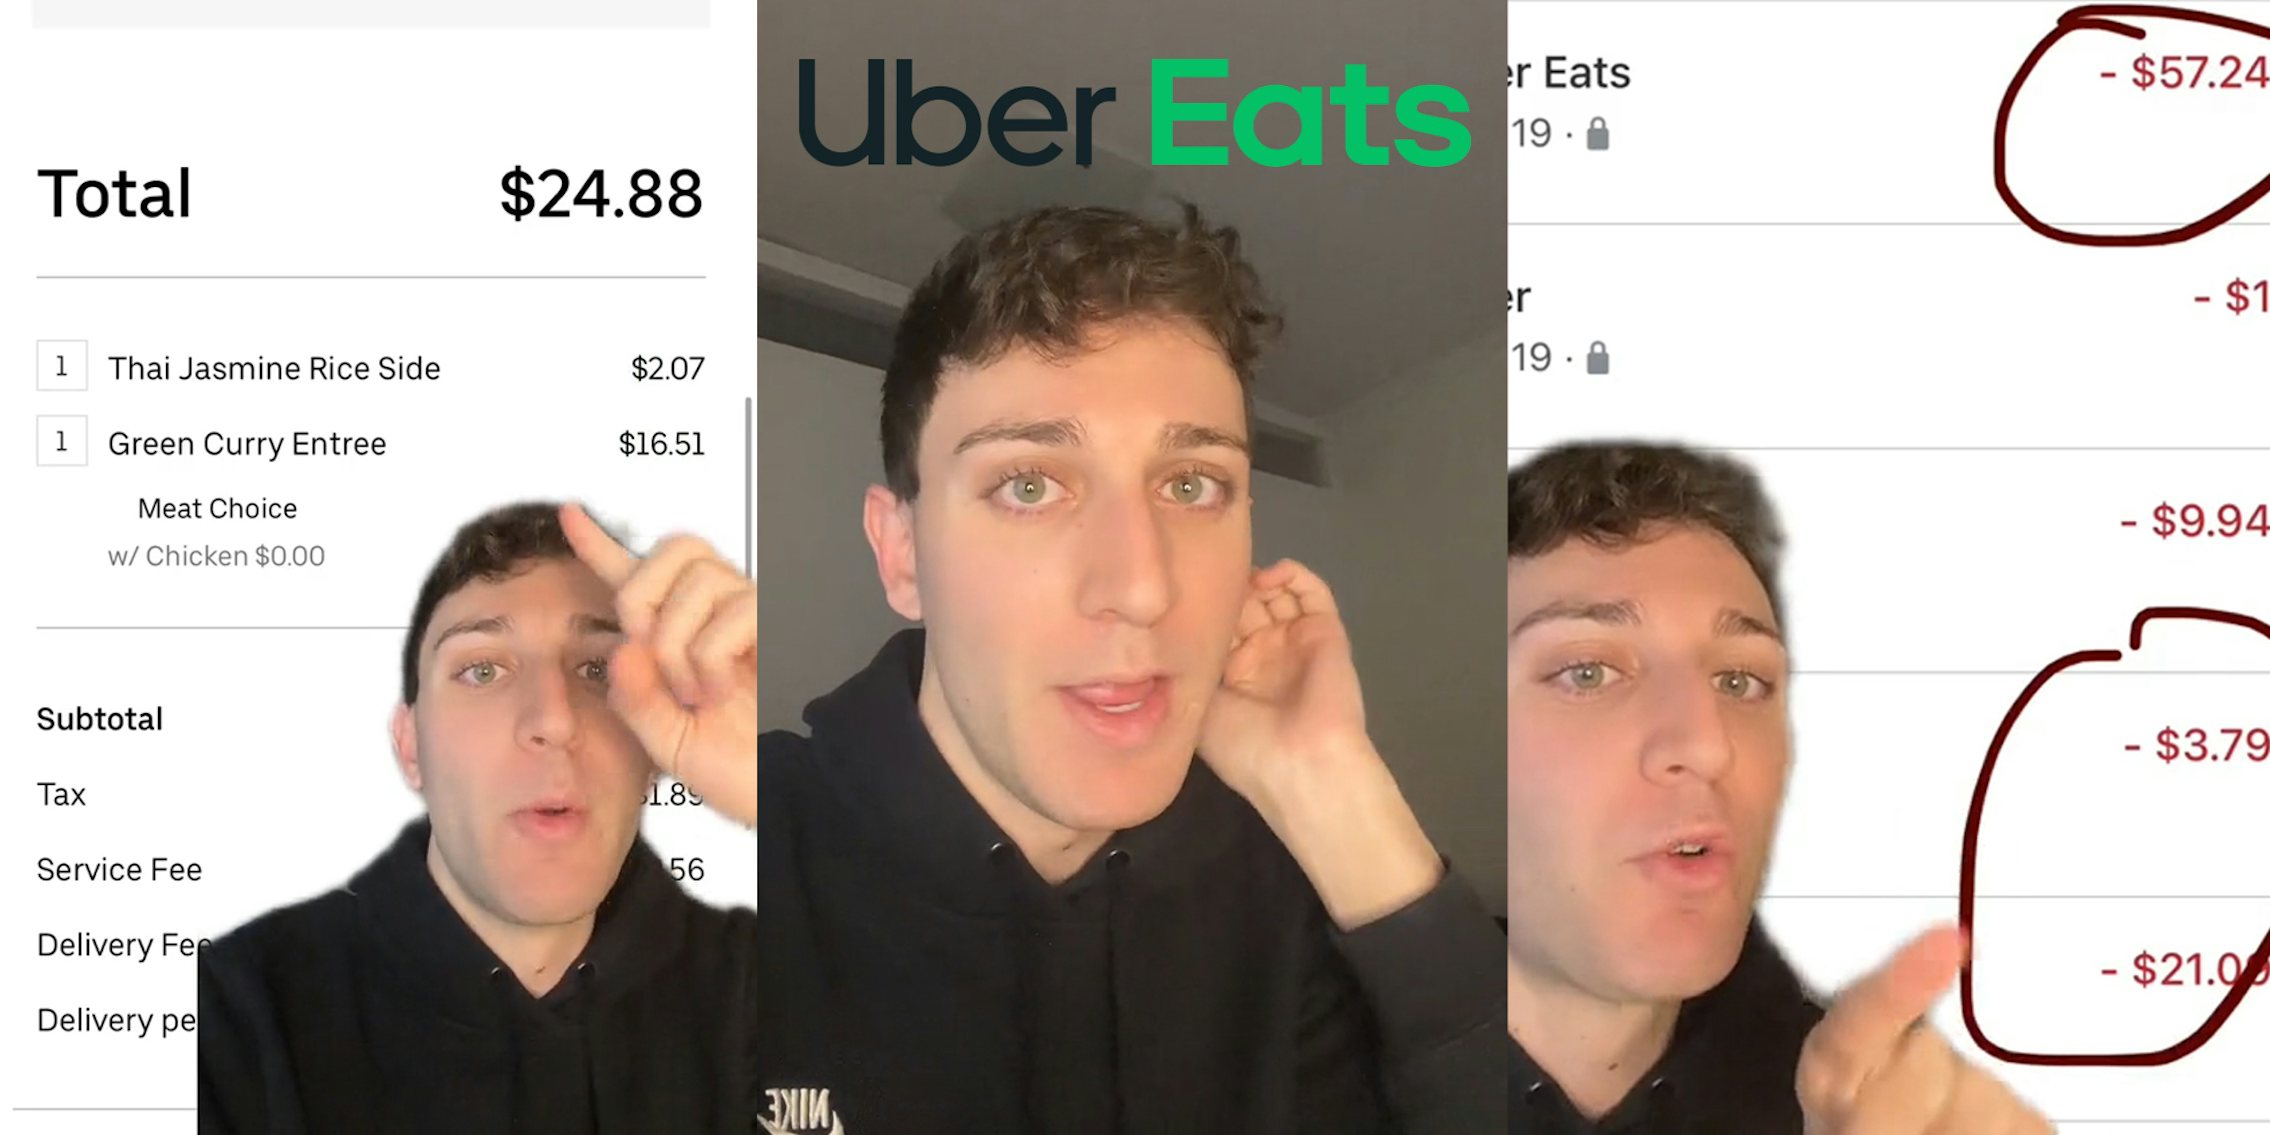 man greenscreen TikTok over image of Uber Eats order with total at '$24.88' (l) man speaking with hand on ear and 'Uber Eats' logo above head (c) man greenscreen TikTok over Uber Eats charges '-$57.24 -$3.79 -$21.00' circled (r)